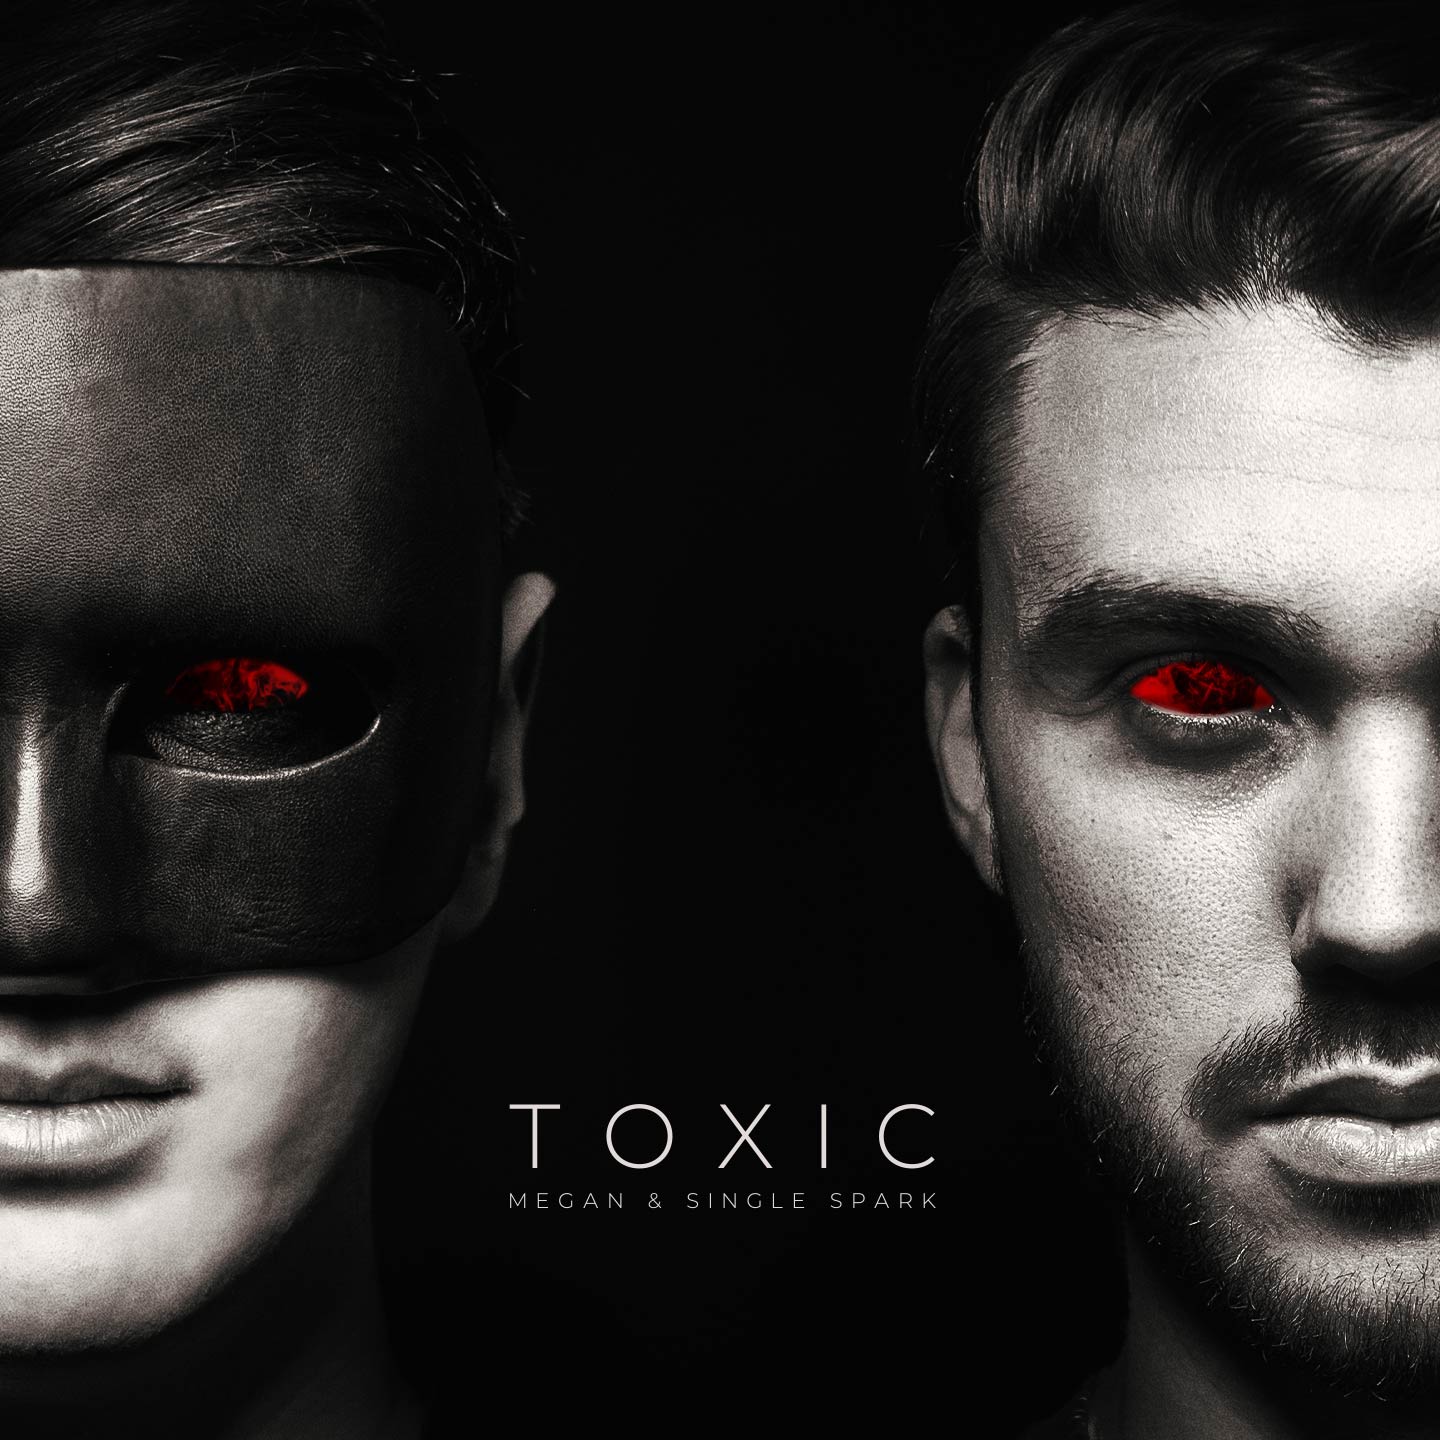 Winners announced for “Toxic” remix contest by MEGAN & Single Spark!